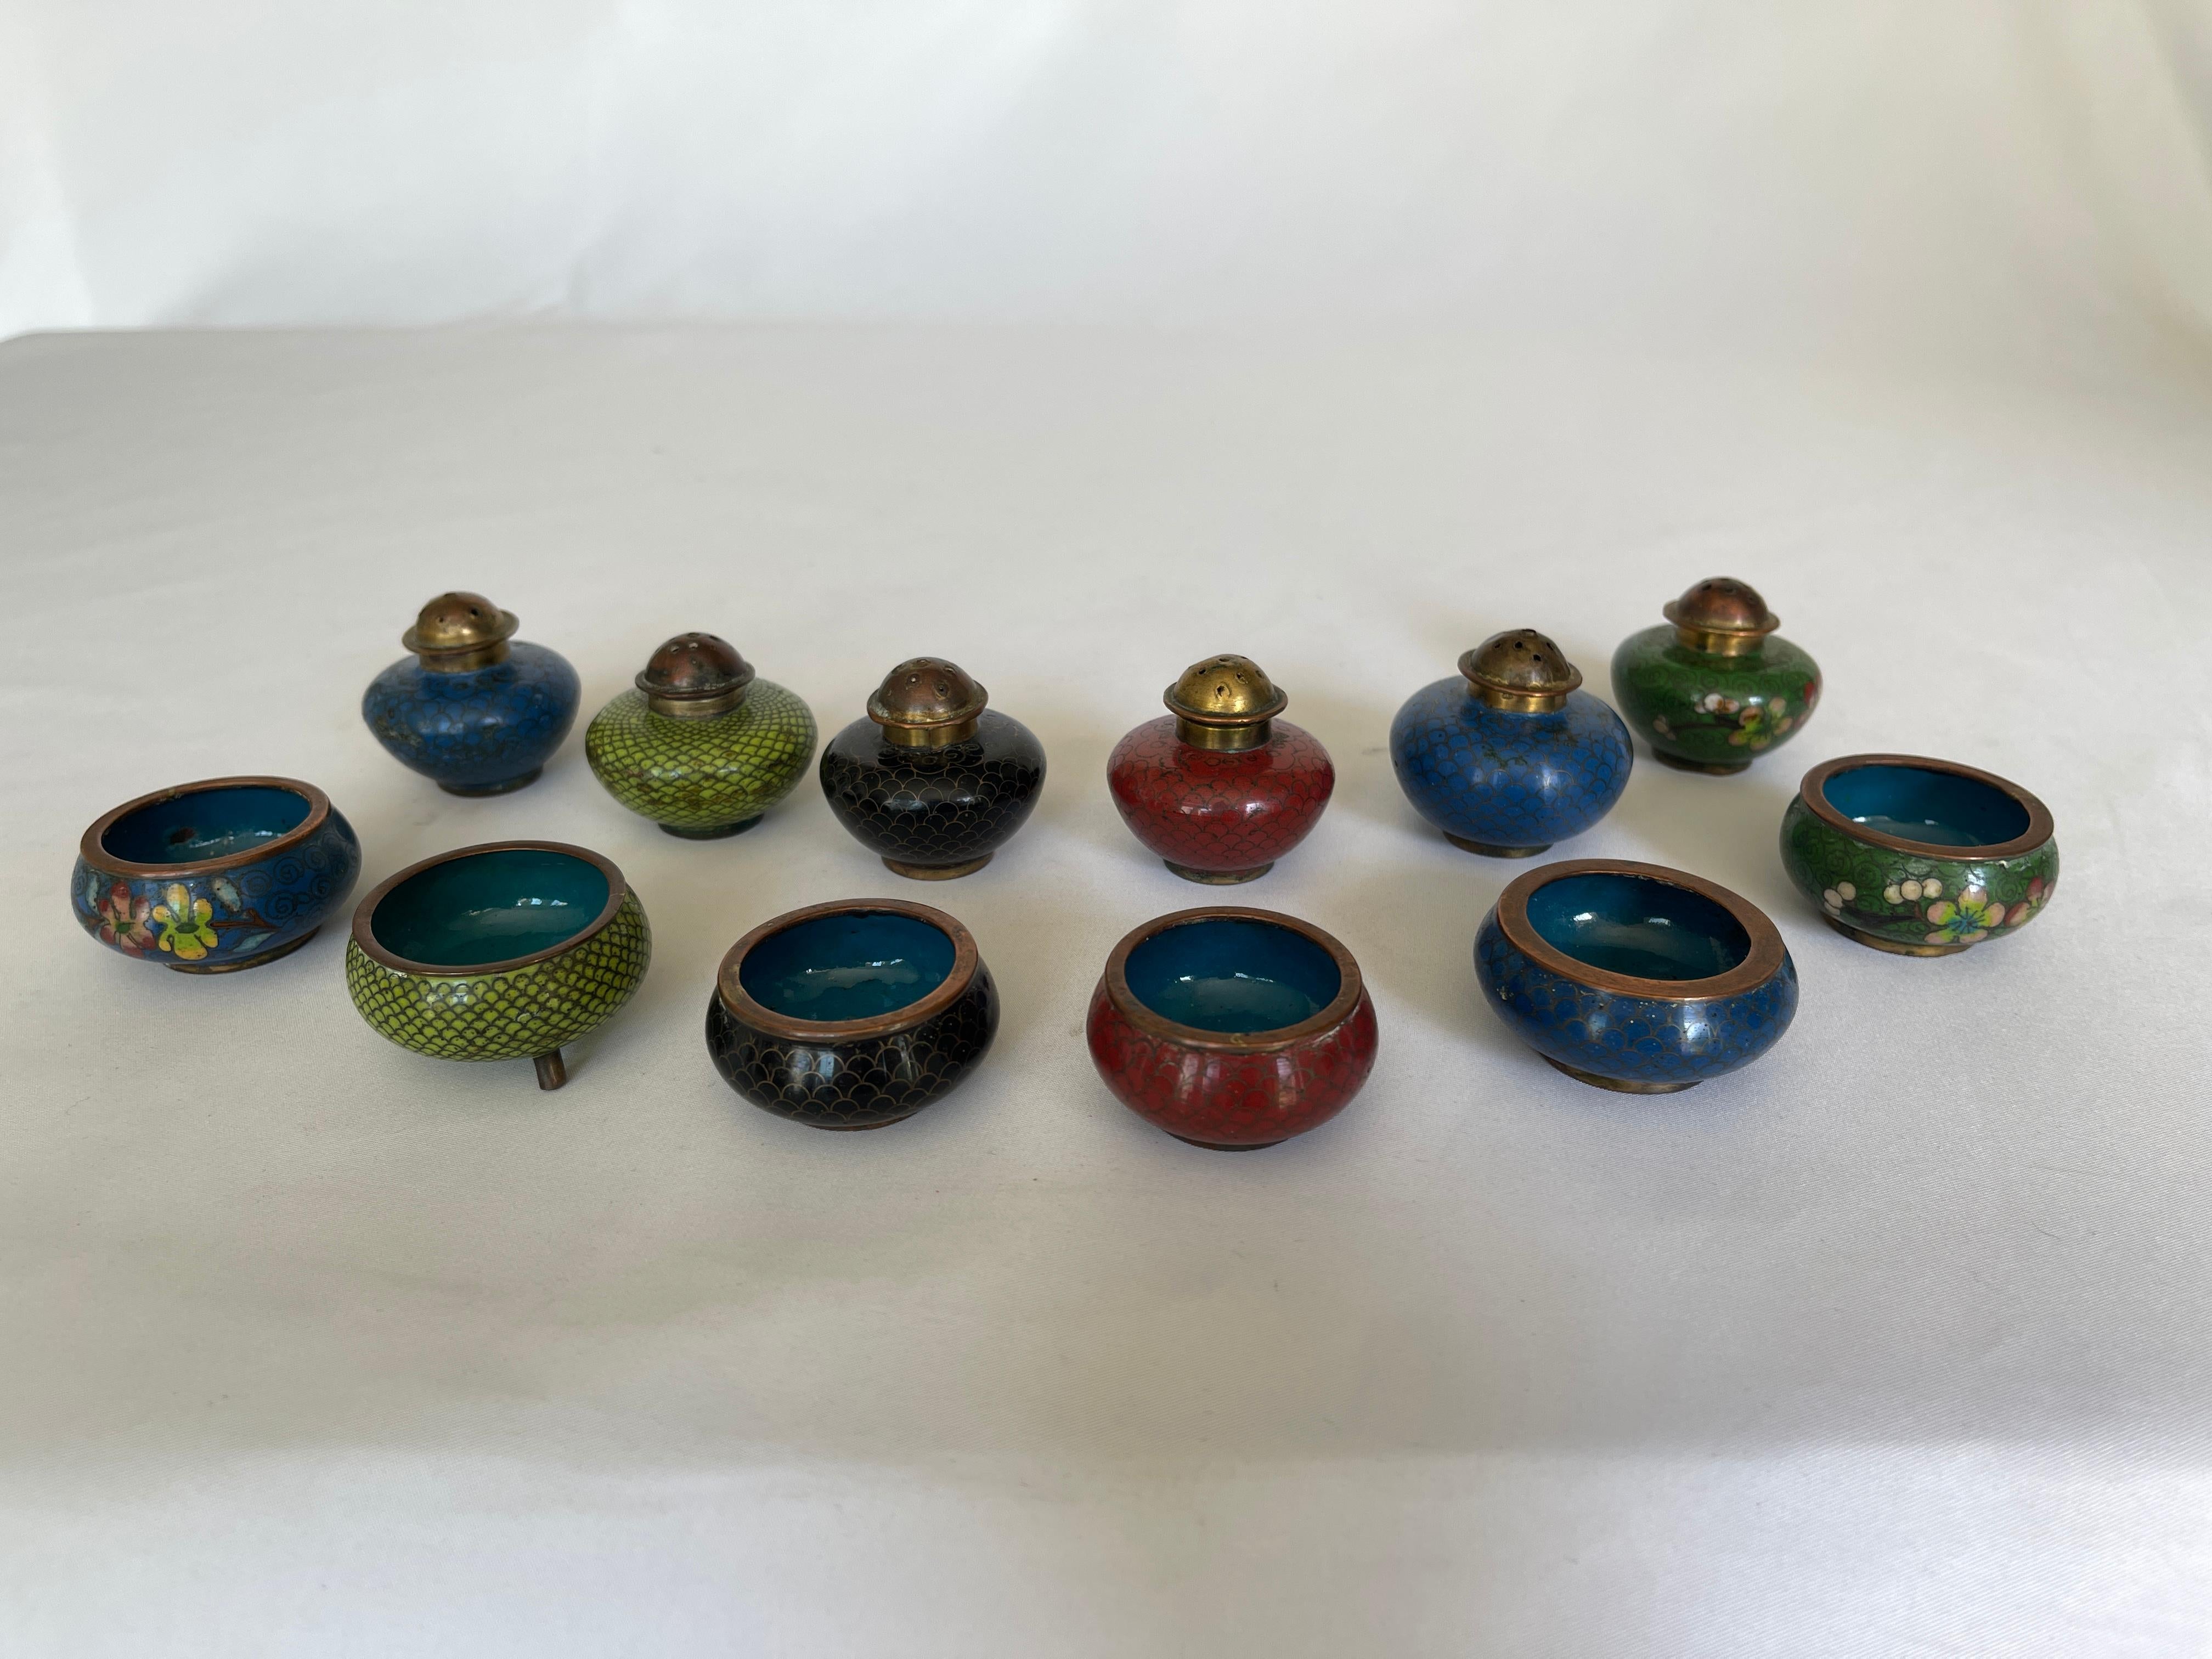 Antique Chinese Cloisonné Salt Cellar and Pepper Shaker Sets  In Good Condition For Sale In New York, NY